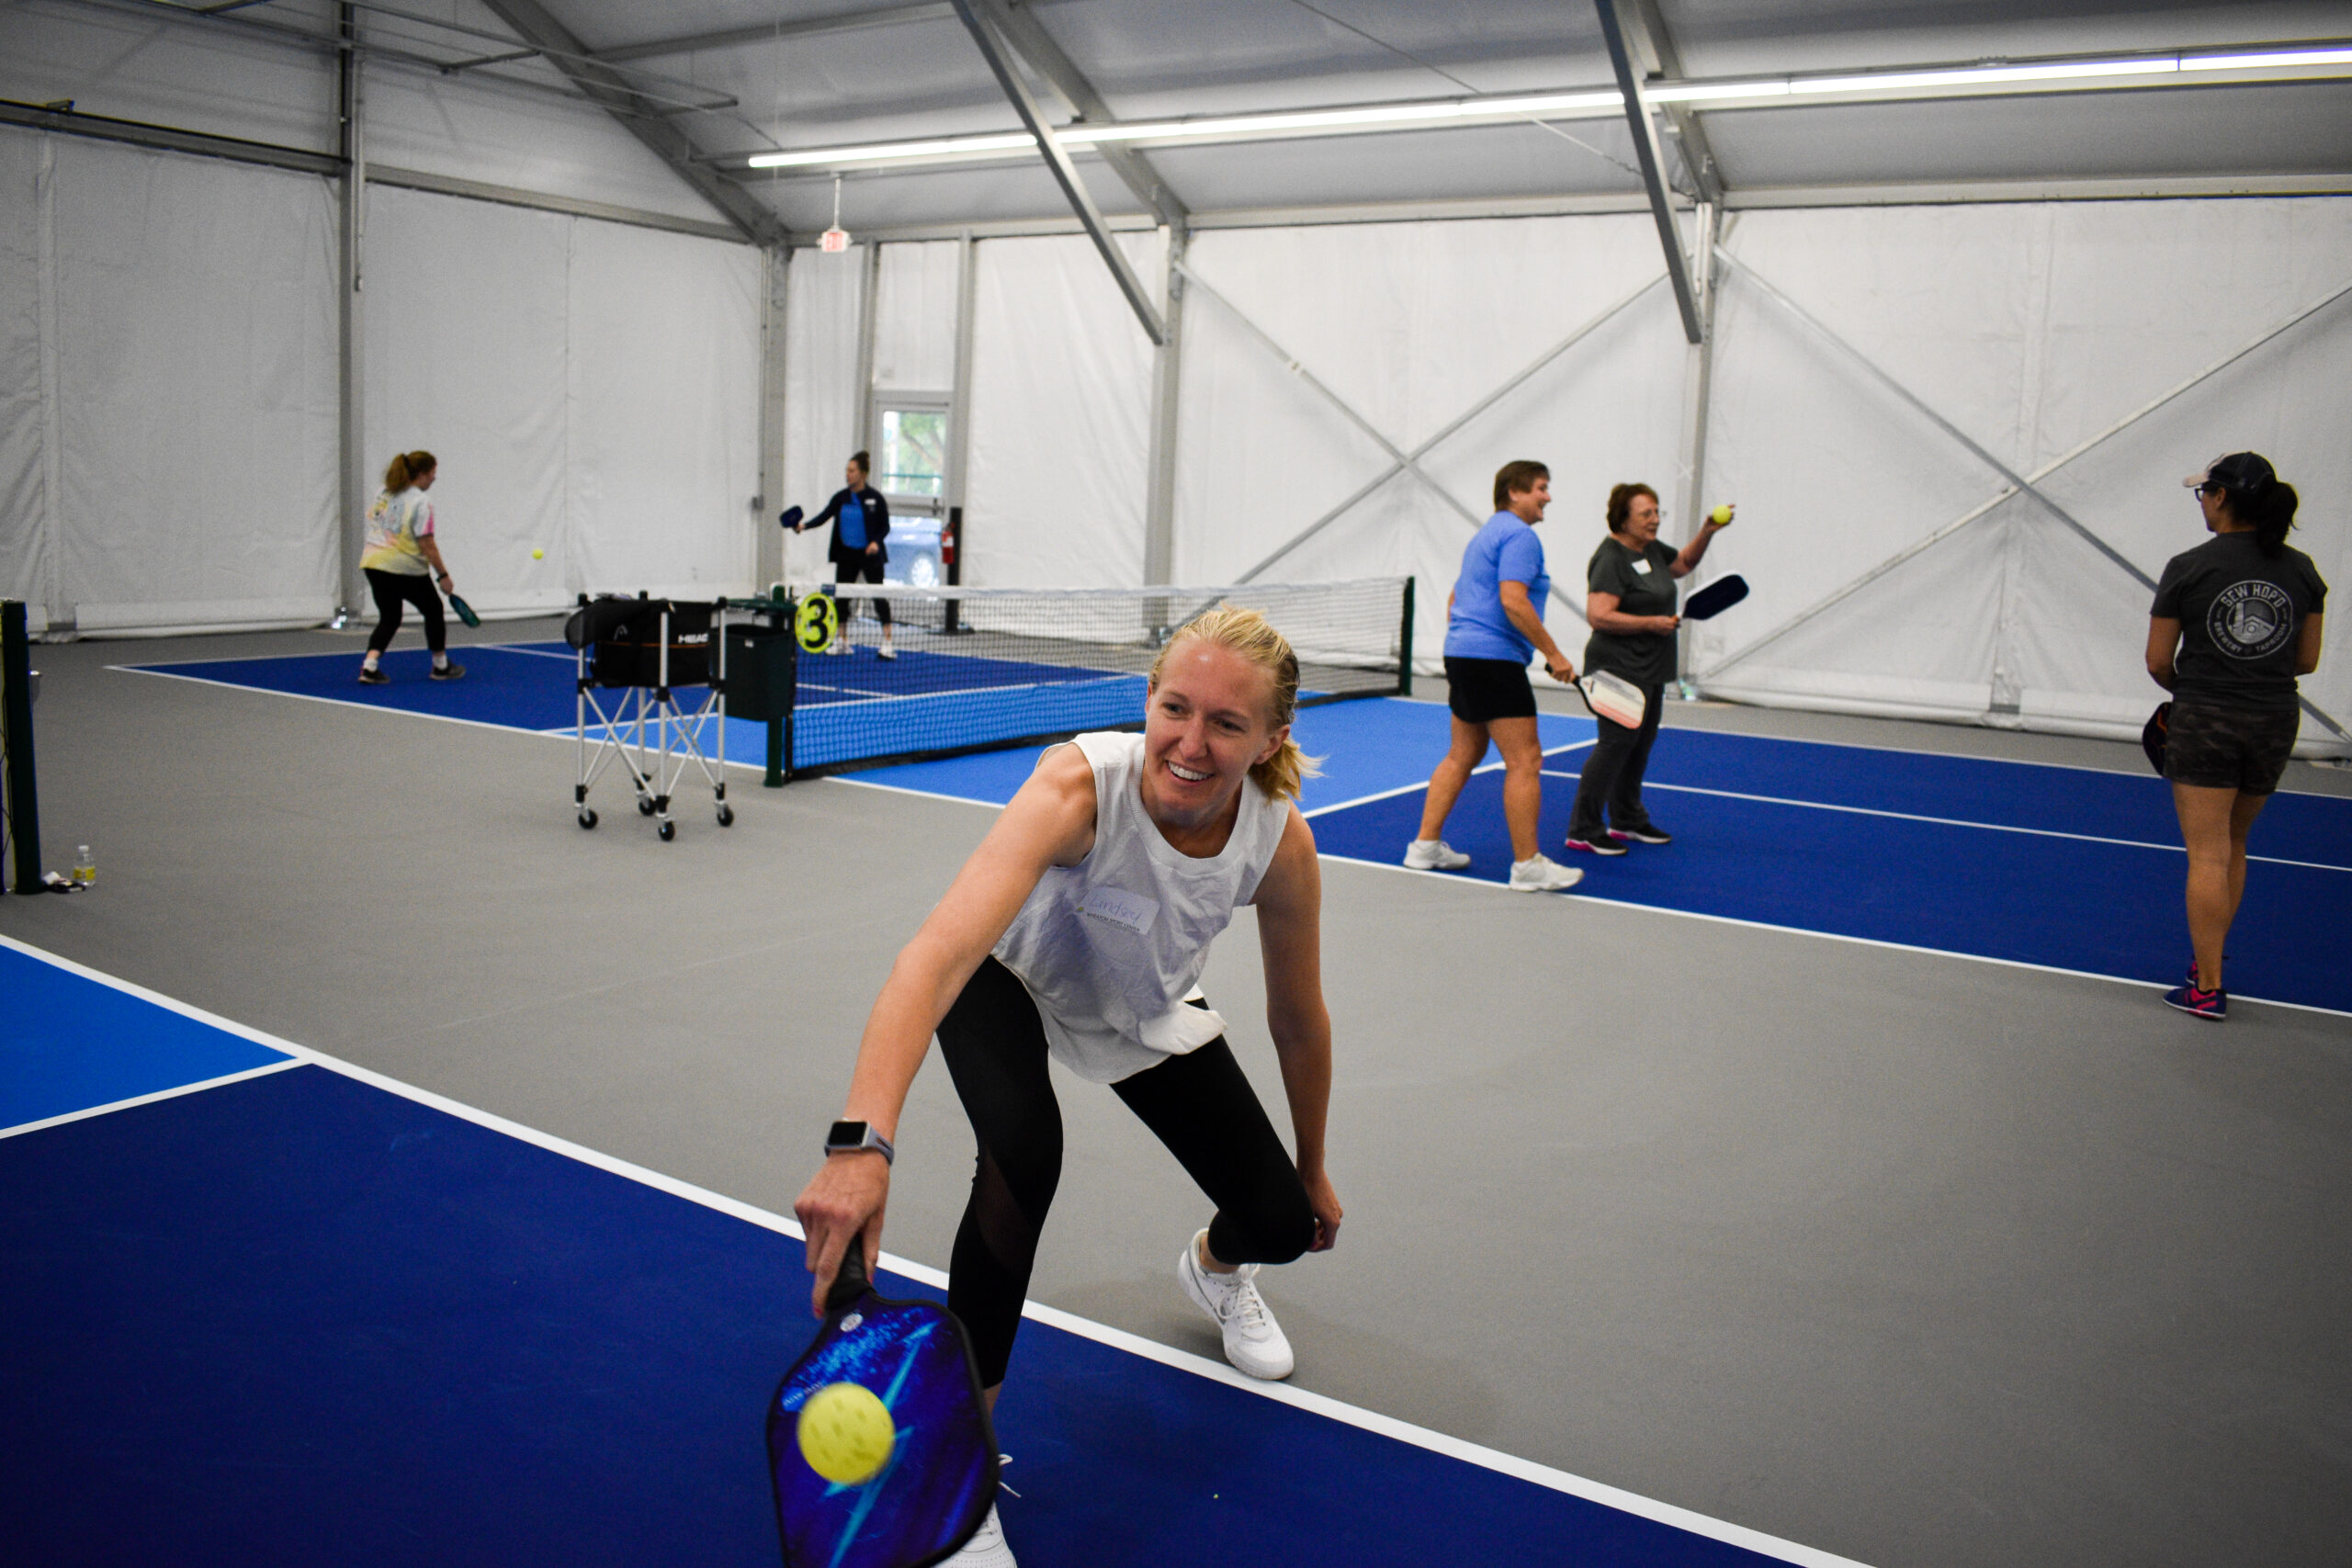 Wheaton Sport Center people playing pickleball in new Pickleball Pavilion